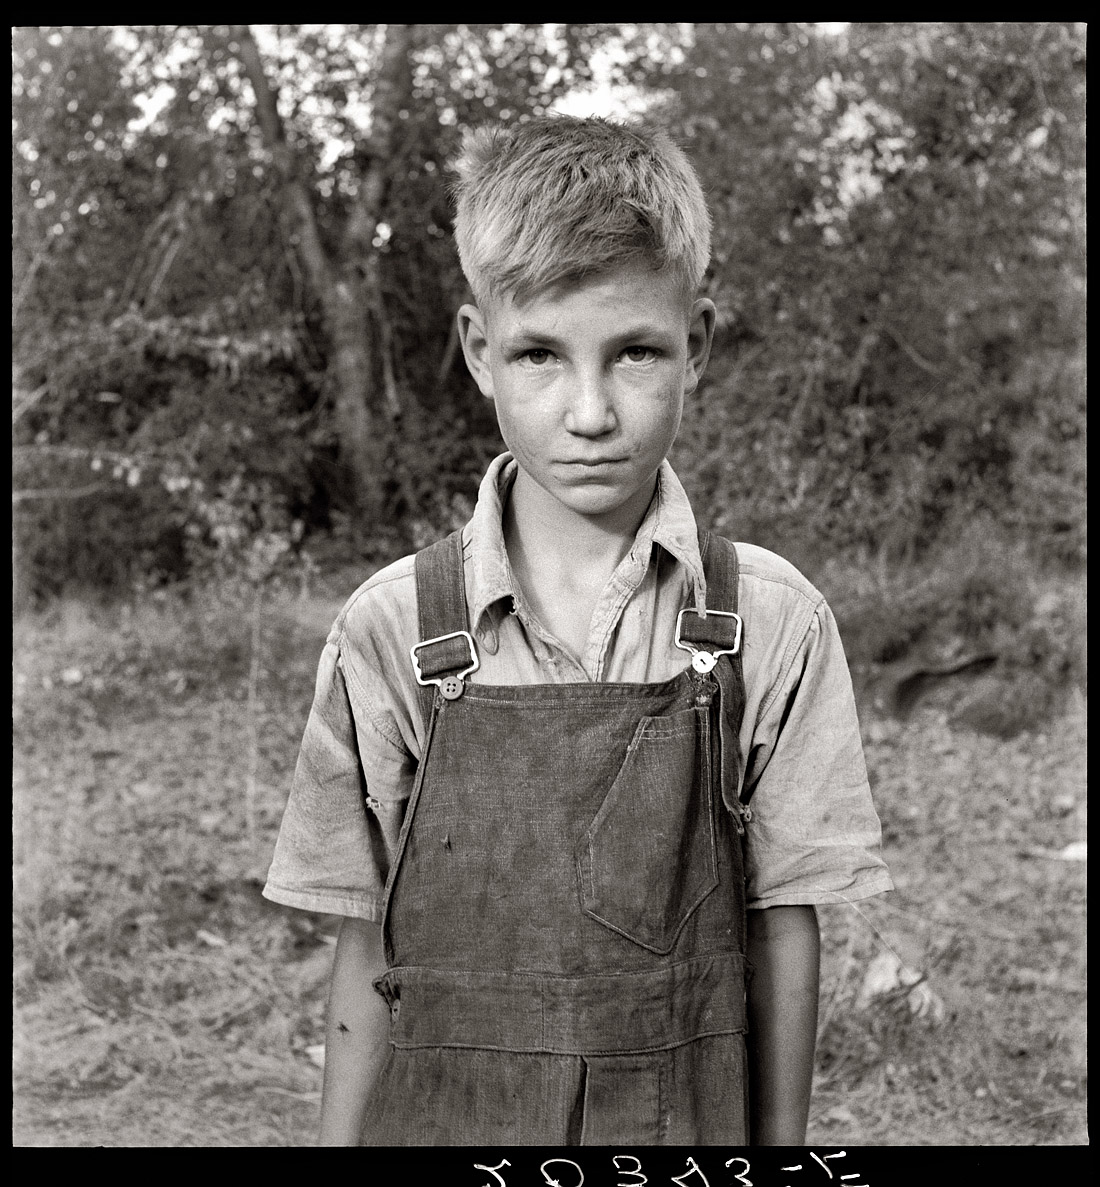 August 1939. Migratory boy in squatter camp. Has come to Yakima Valley, Washington, for the third year to pick hops. Mother: "You'd be surprised what that boy can pick." View full size. Photograph by Dorothea Lange.